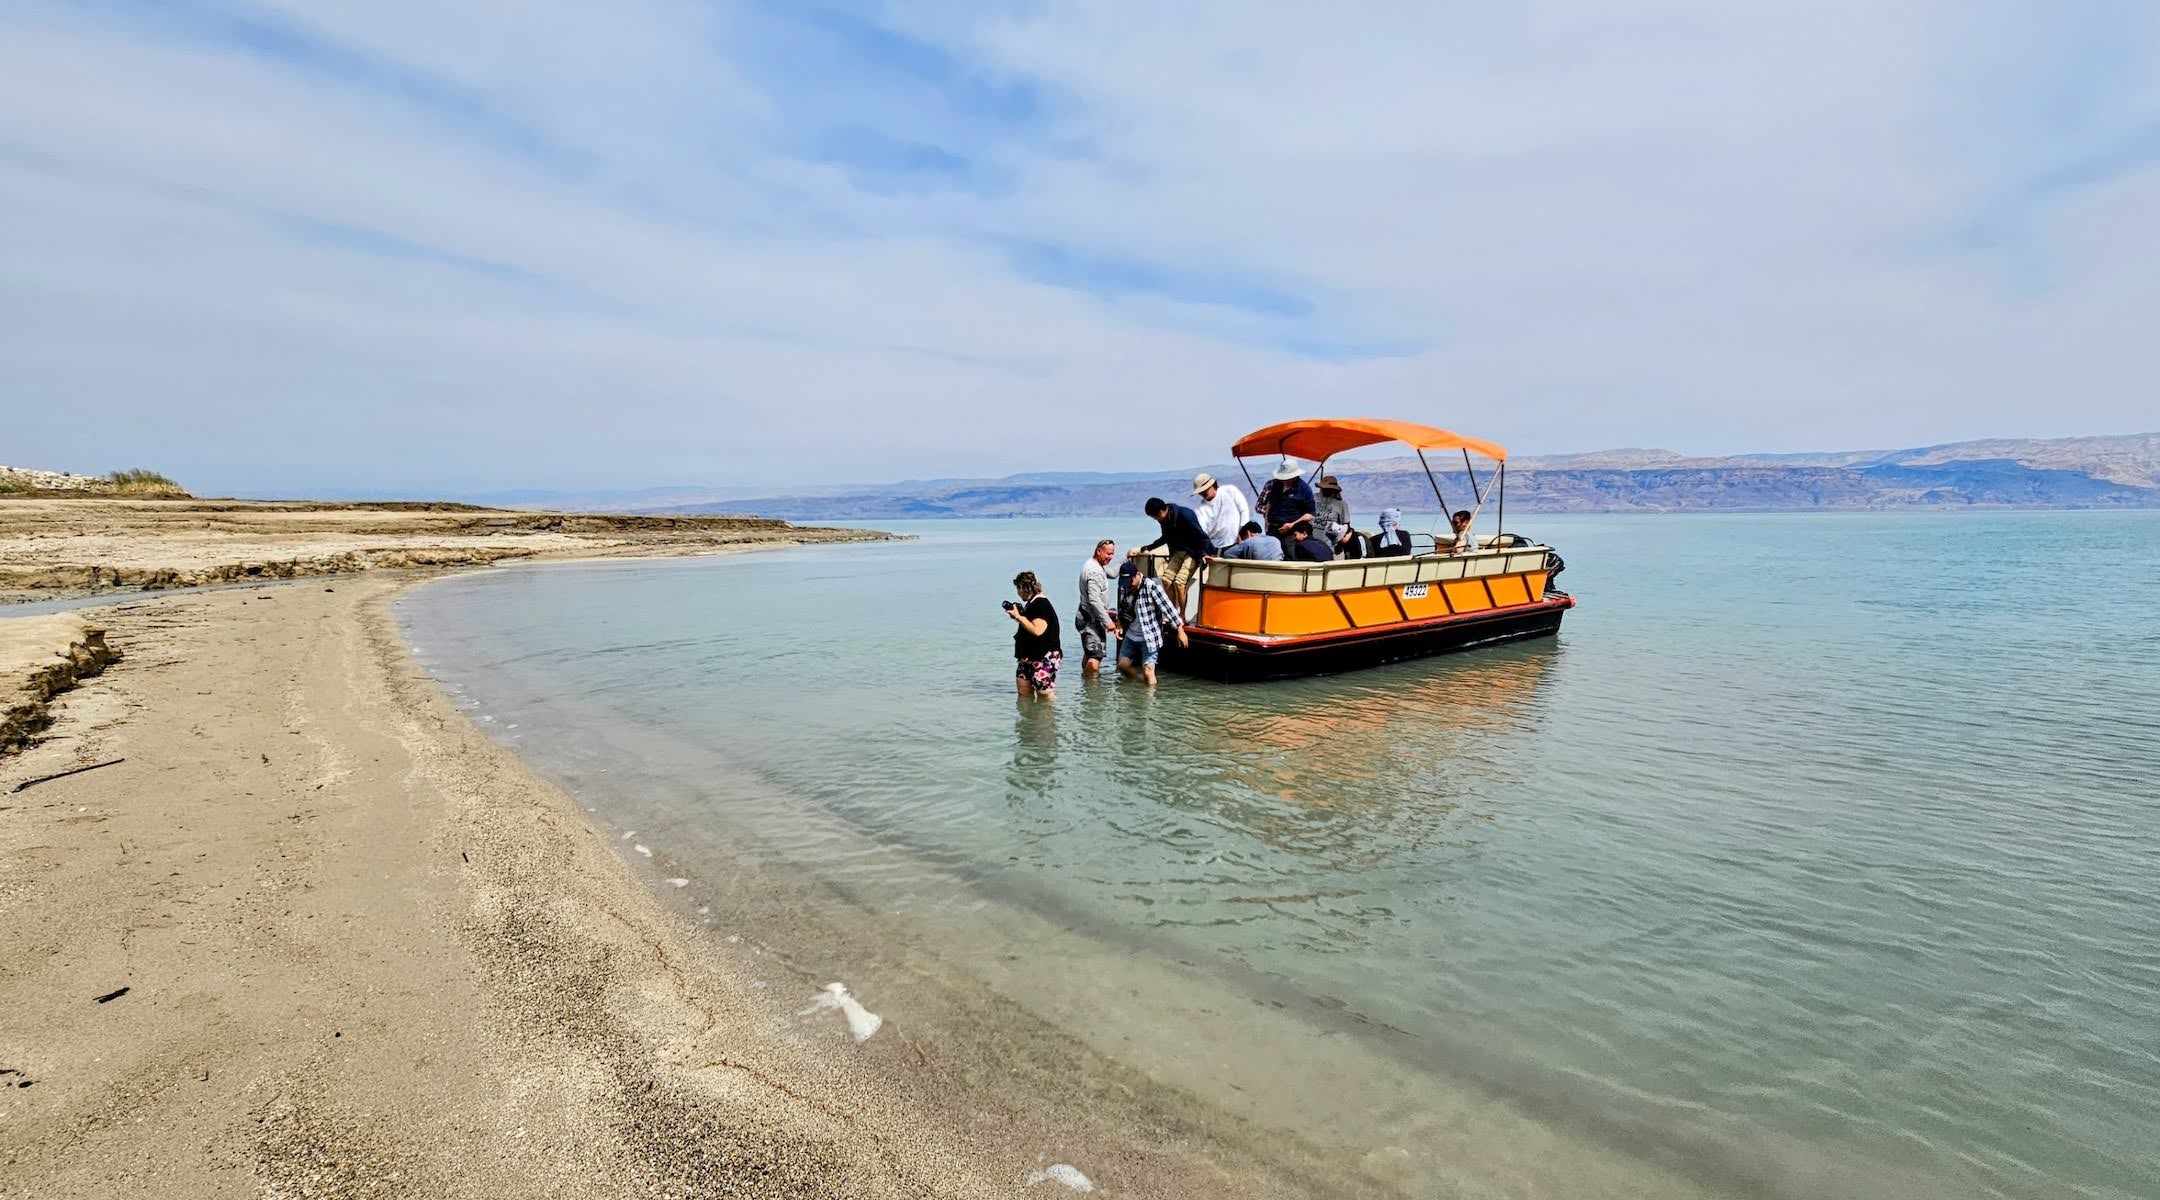 Passengers wade into the waters of the Dead Sea from Noam Bedein’s boat on a recent excursion. (Noam Bedein)